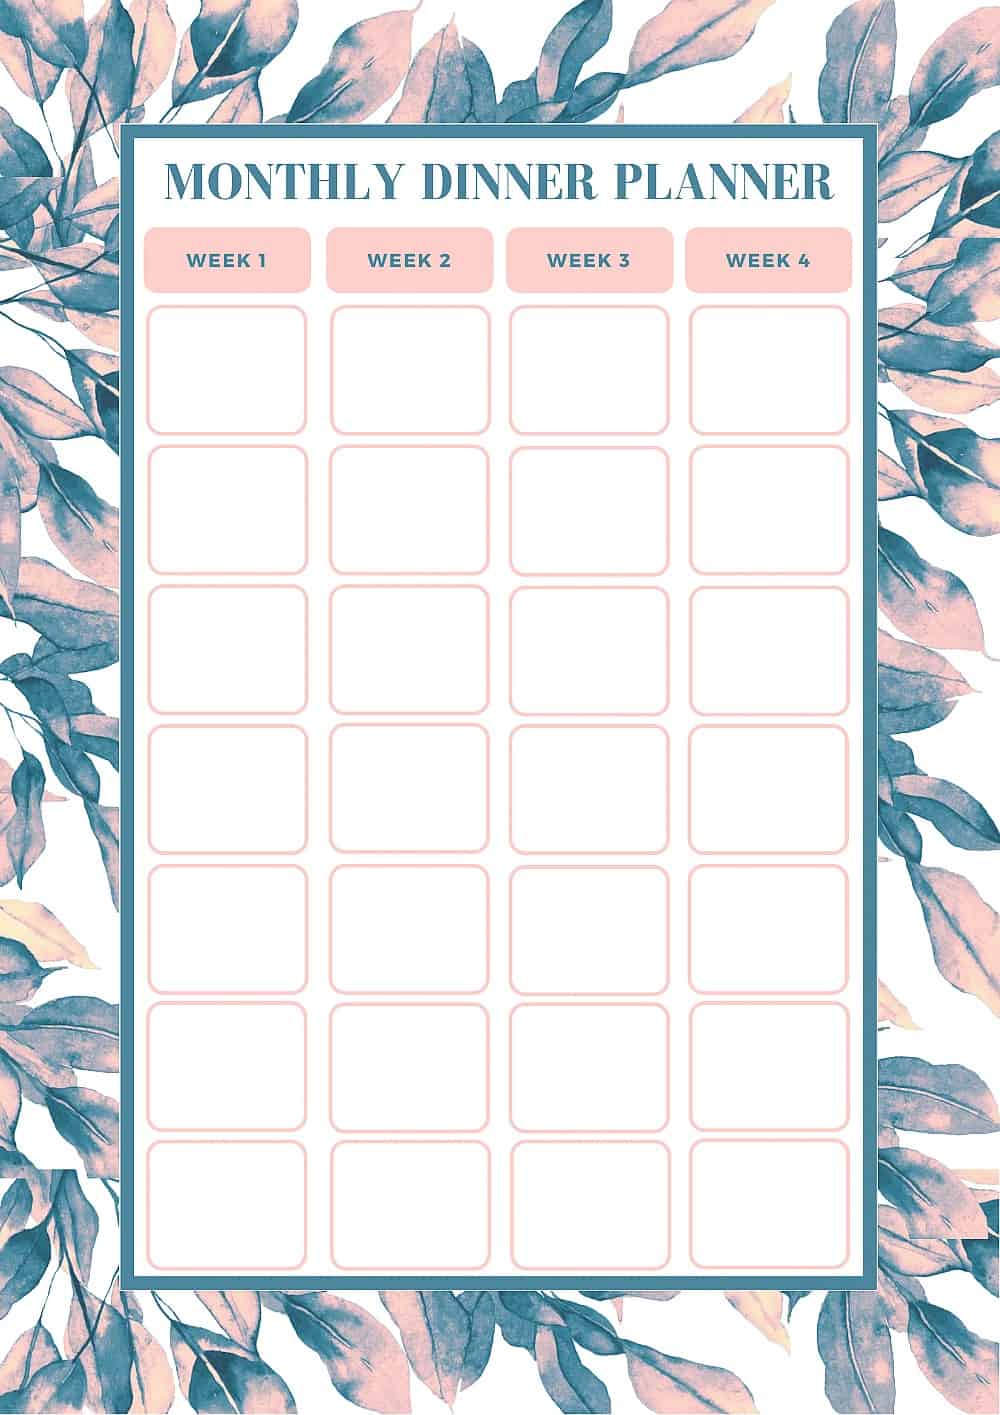 Monthly Dinner Planner Template Free